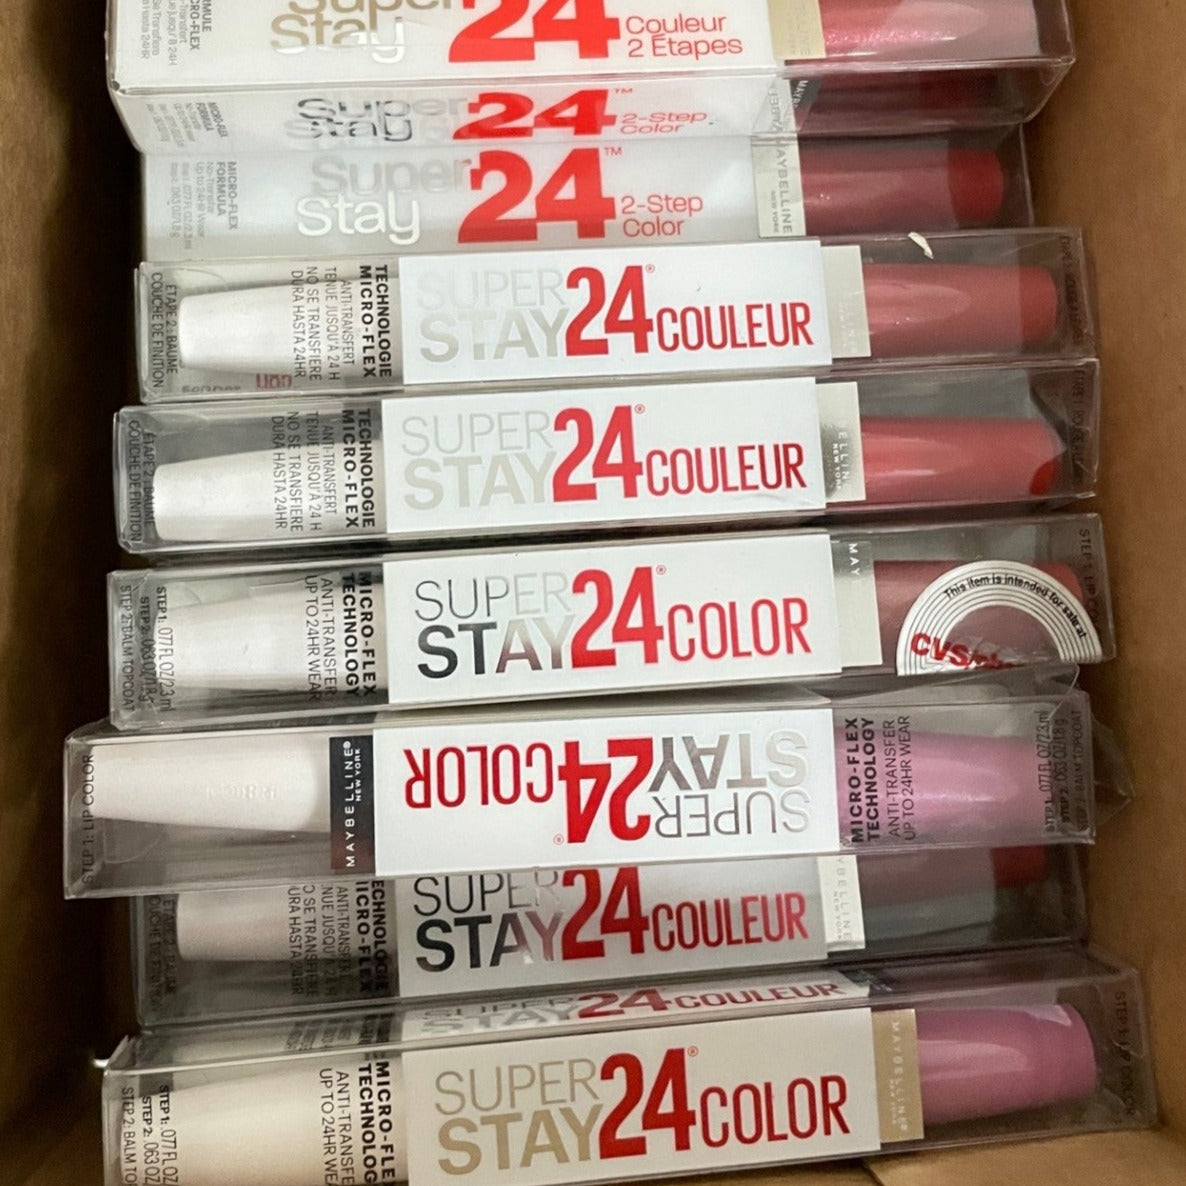 Shelf Pull Makeup - Maybelline Super Stay 24 Hour 2-Step Lip Colo